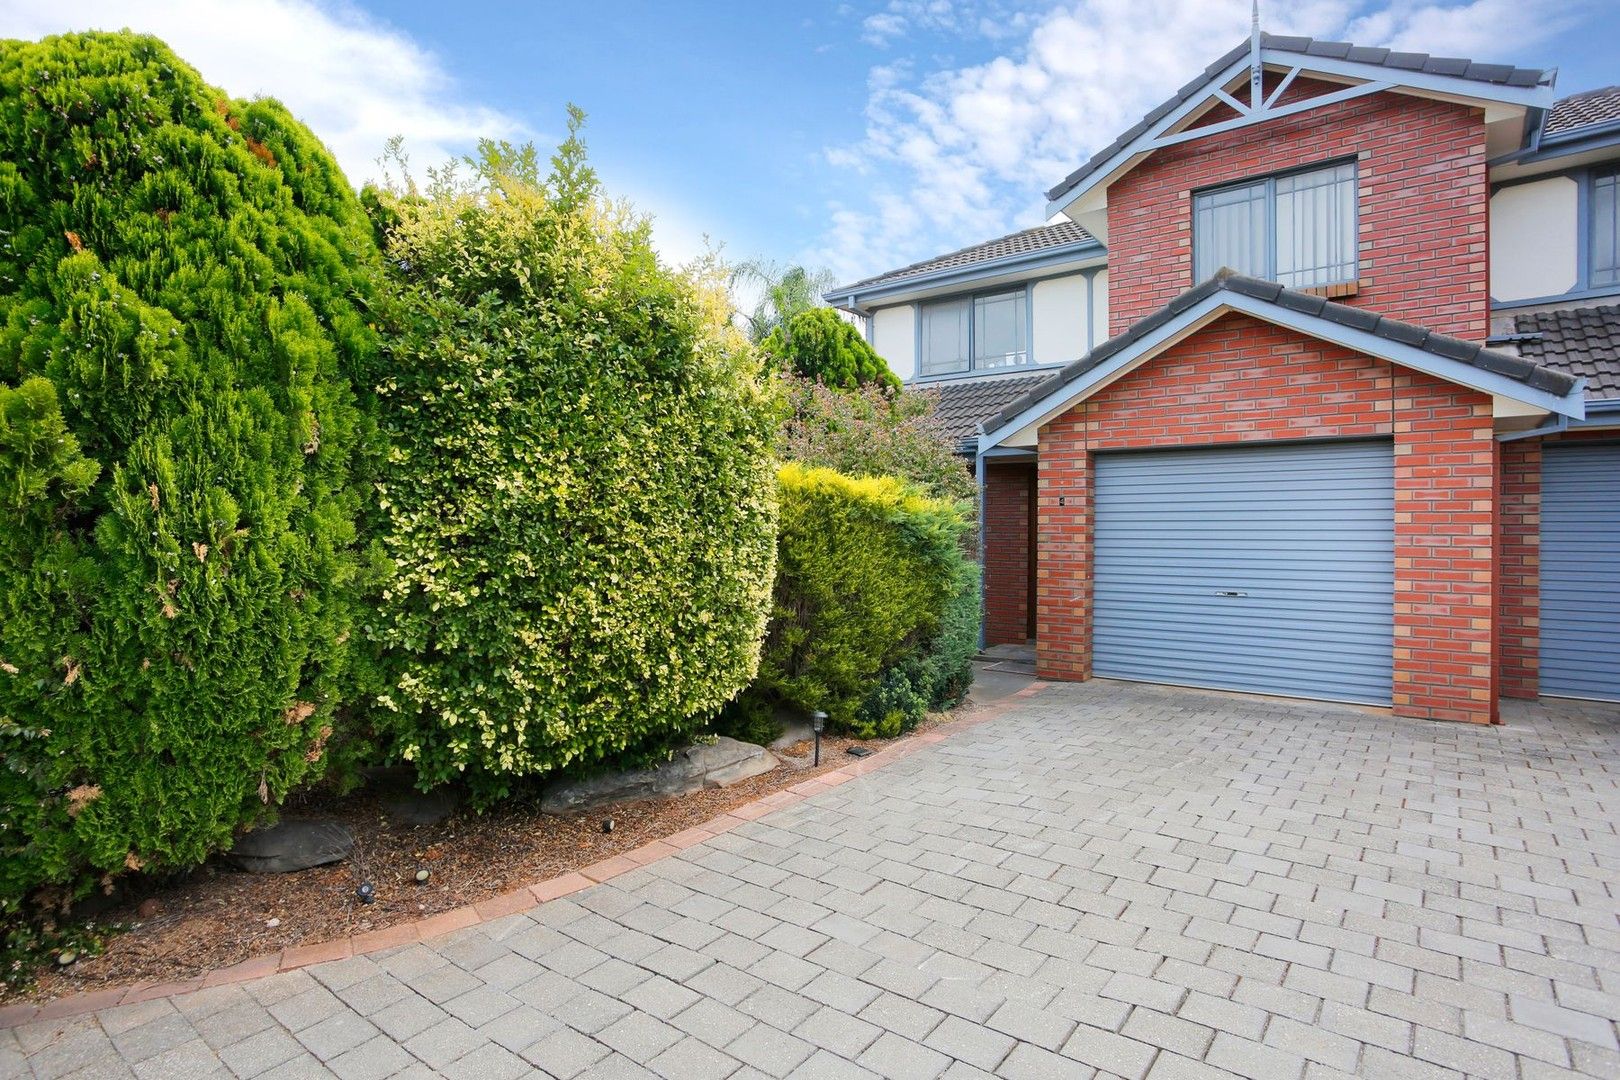 4/15 Wentworth Court, Golden Grove SA 5125, Image 1